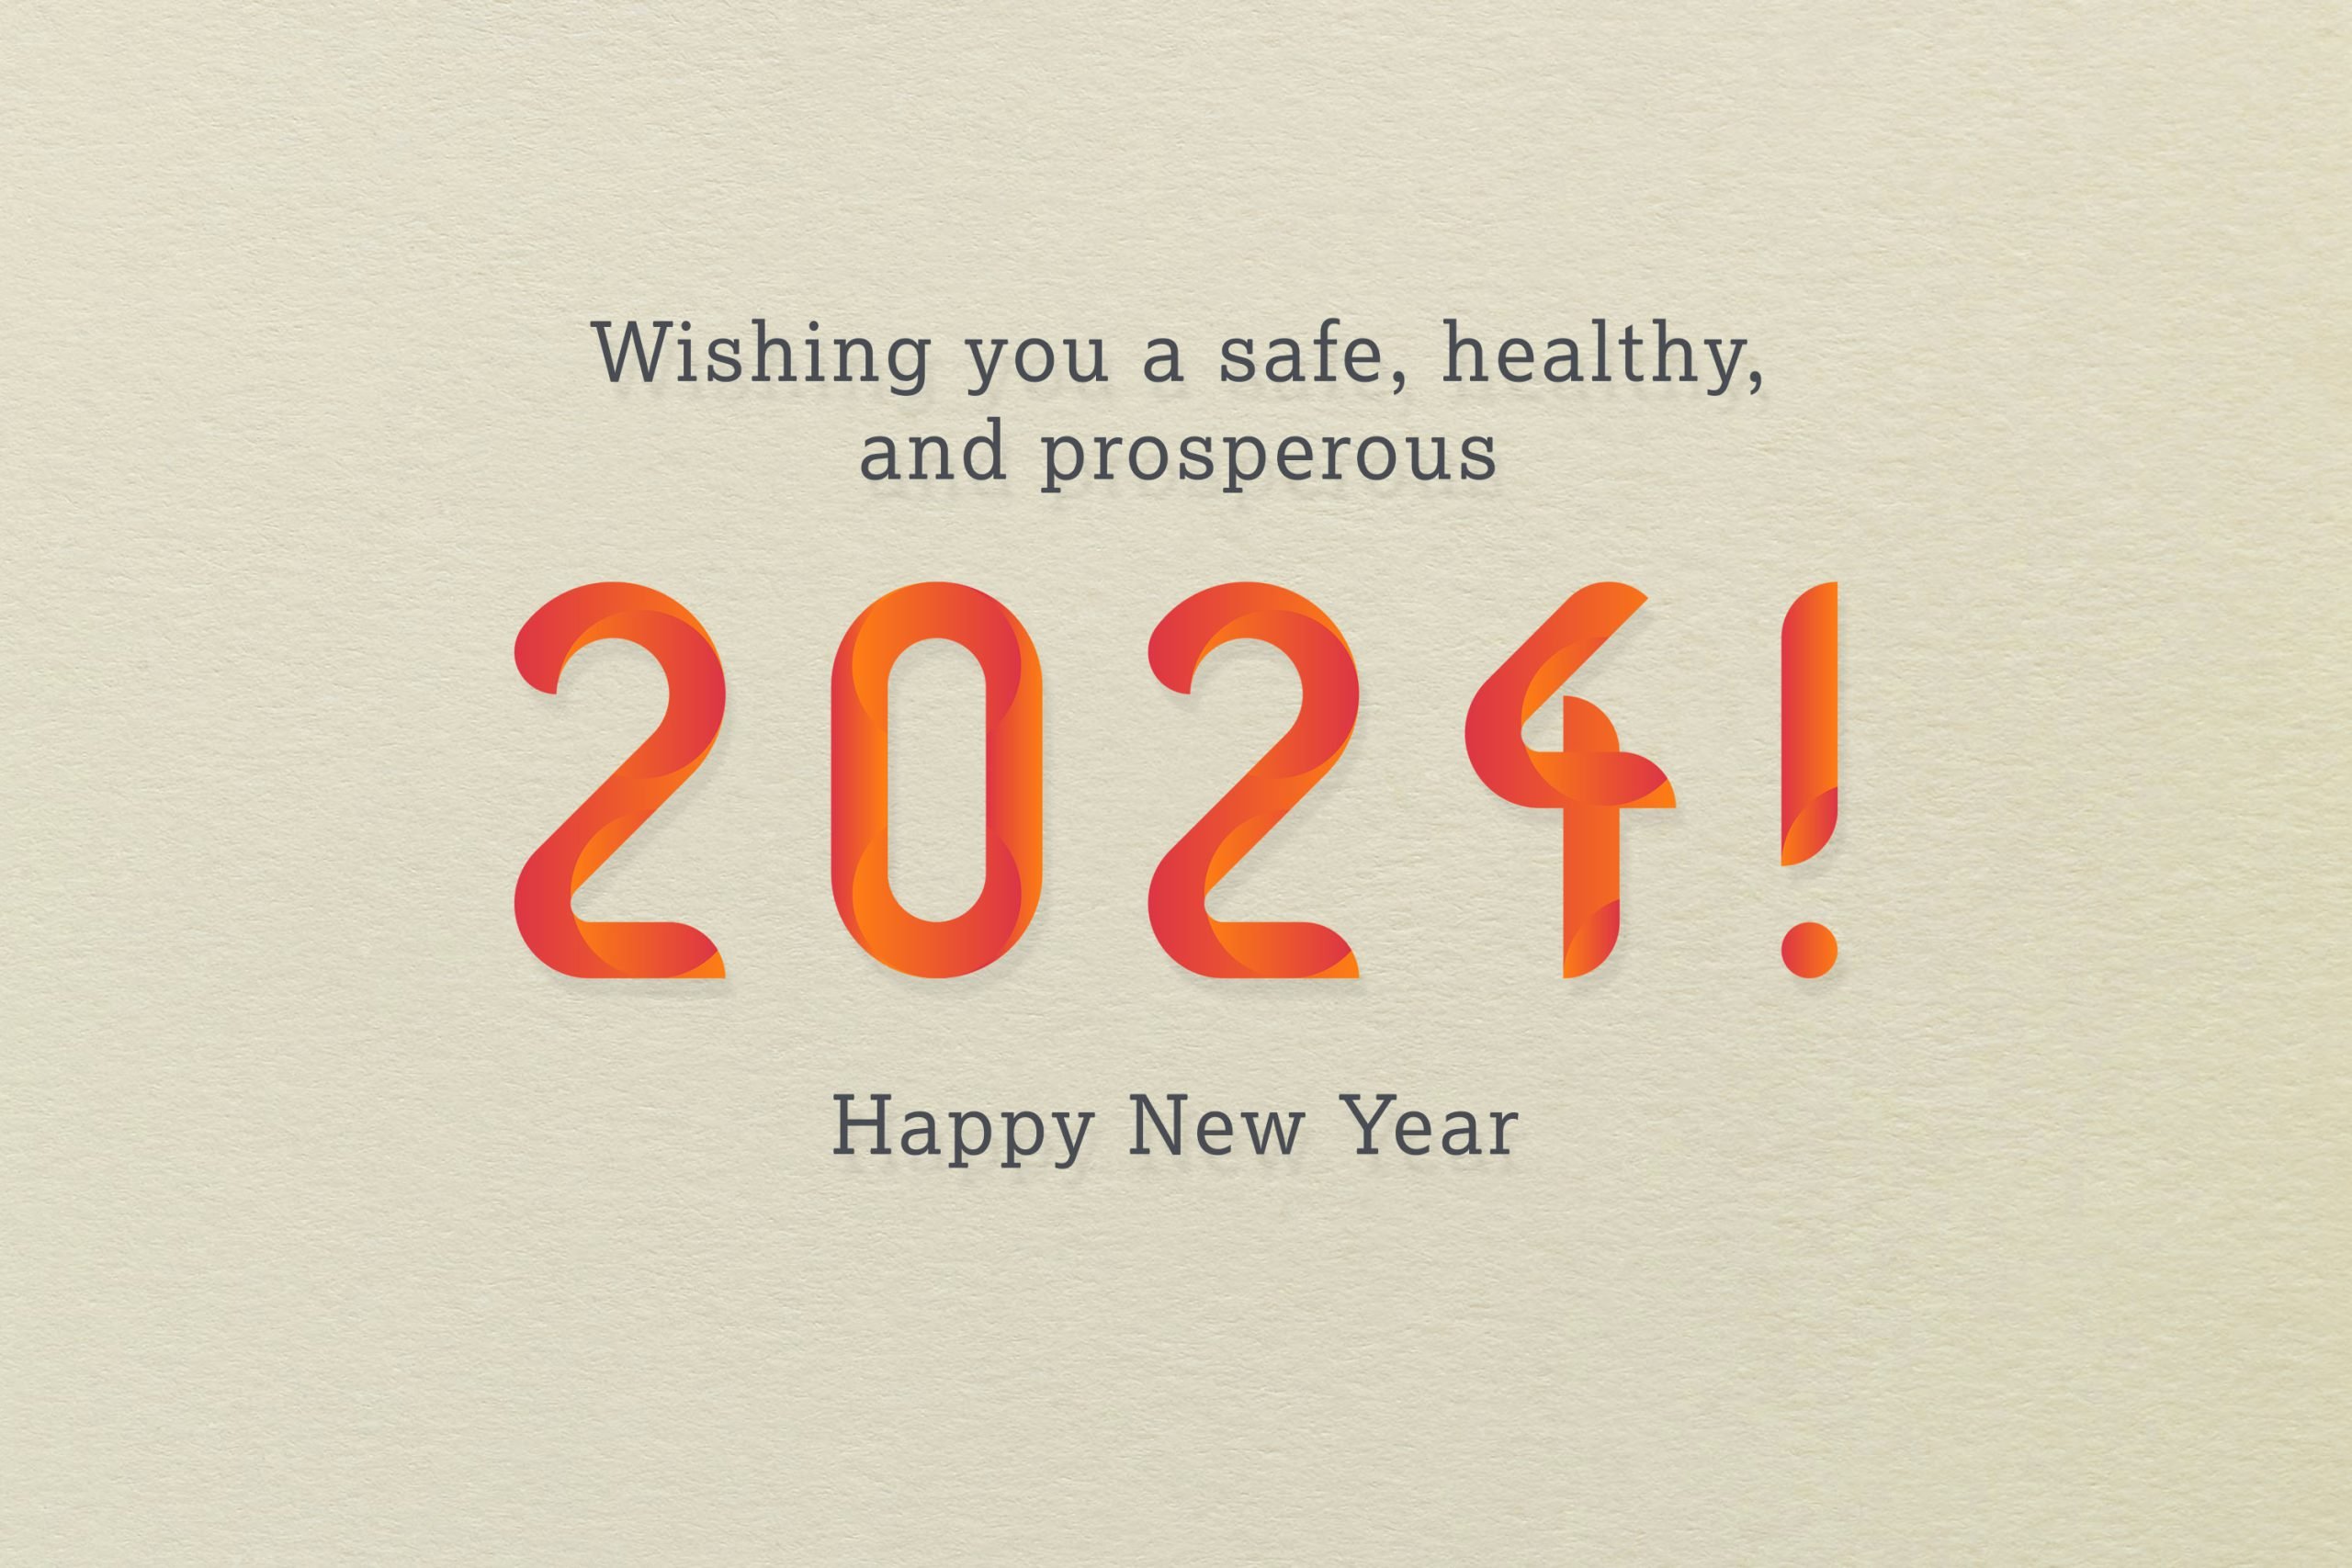 Happy New Year 2024 Image, Background & Wallpaper